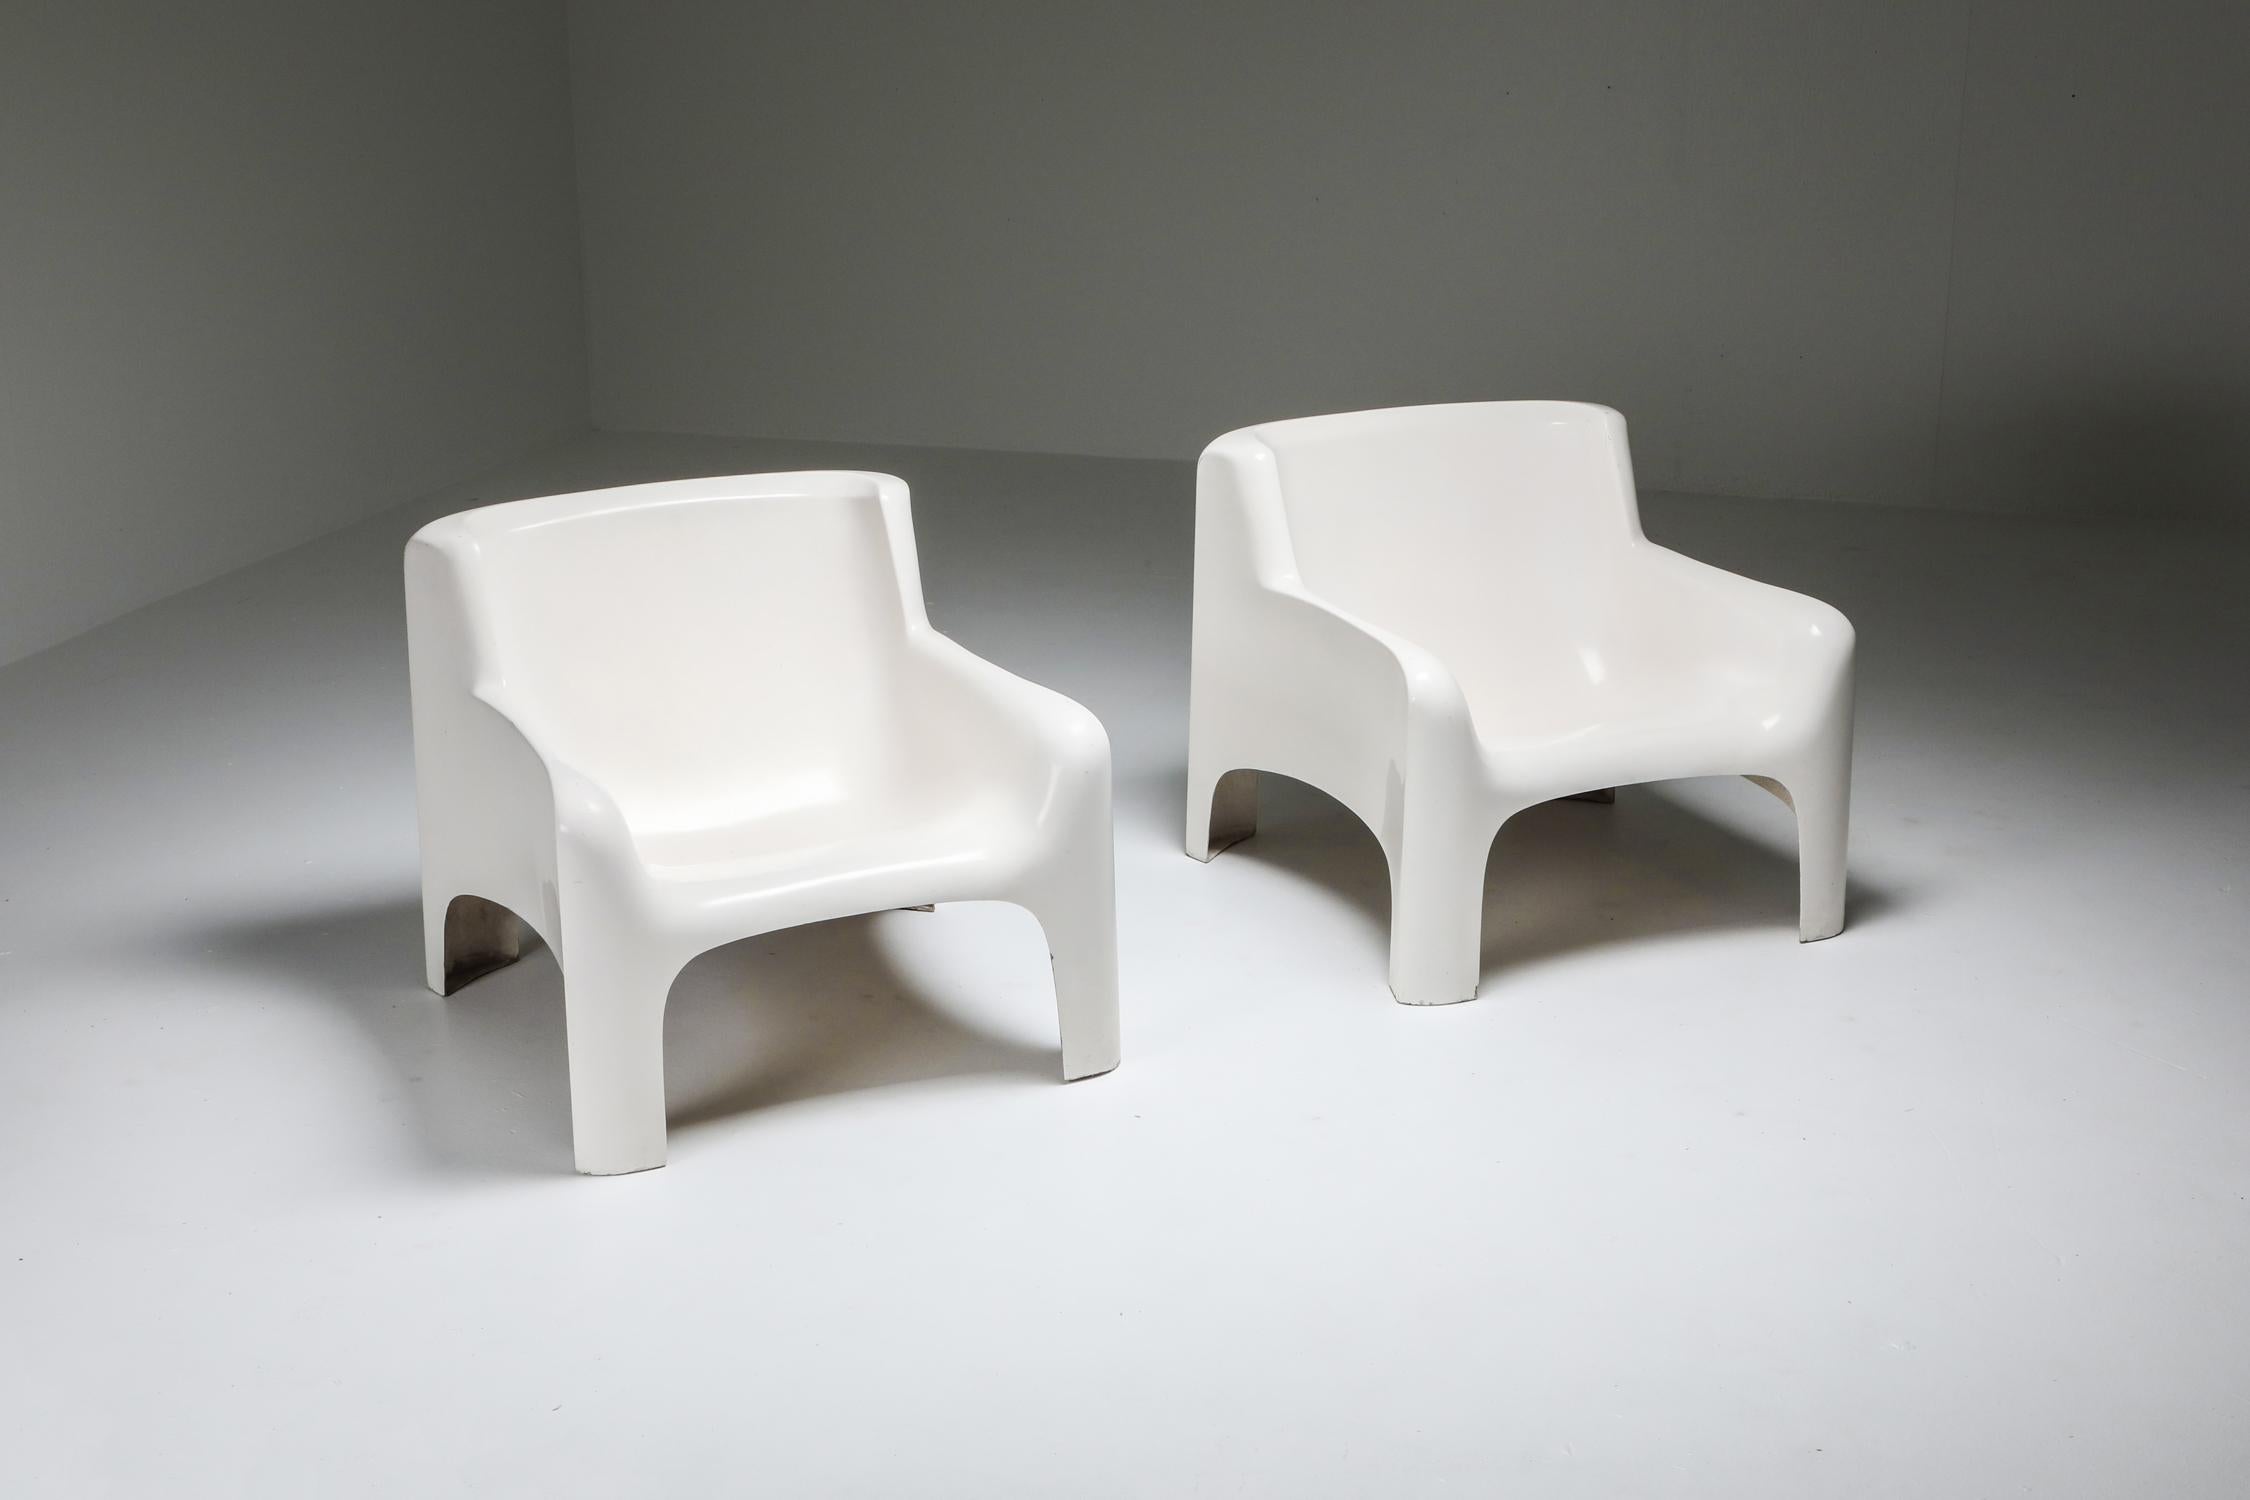 Carlo Bartali, model 'Solar', Arflex, Italy, 1965, four armchairs available

Fiberglass and polyester resin with lacquer finish
These elegant lounge chairs by Carlo Bartoli were made in Italy by Arflex and imported into the US by Stendig. 
The